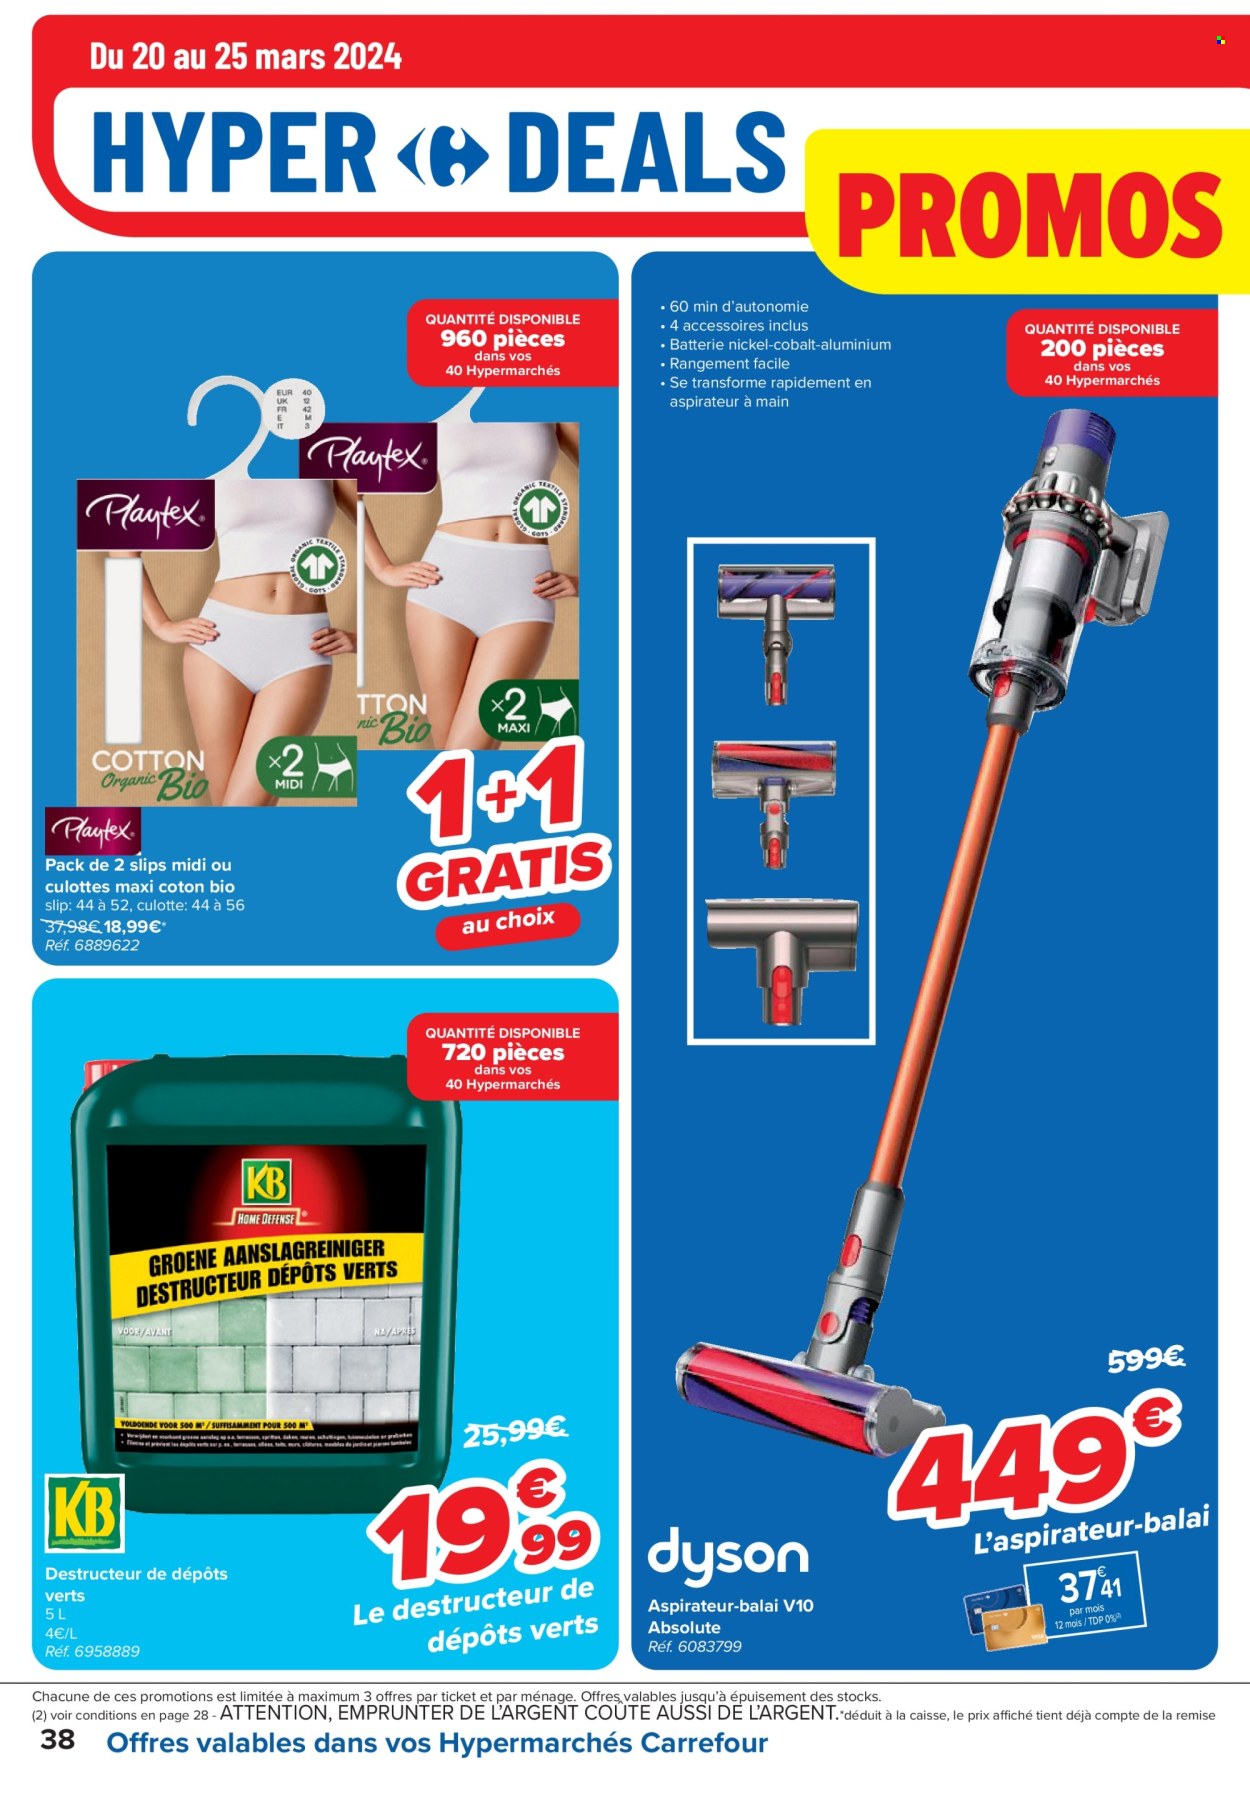 Catalogue Carrefour hypermarkt - 20.3.2024 - 2.4.2024. Page 38.